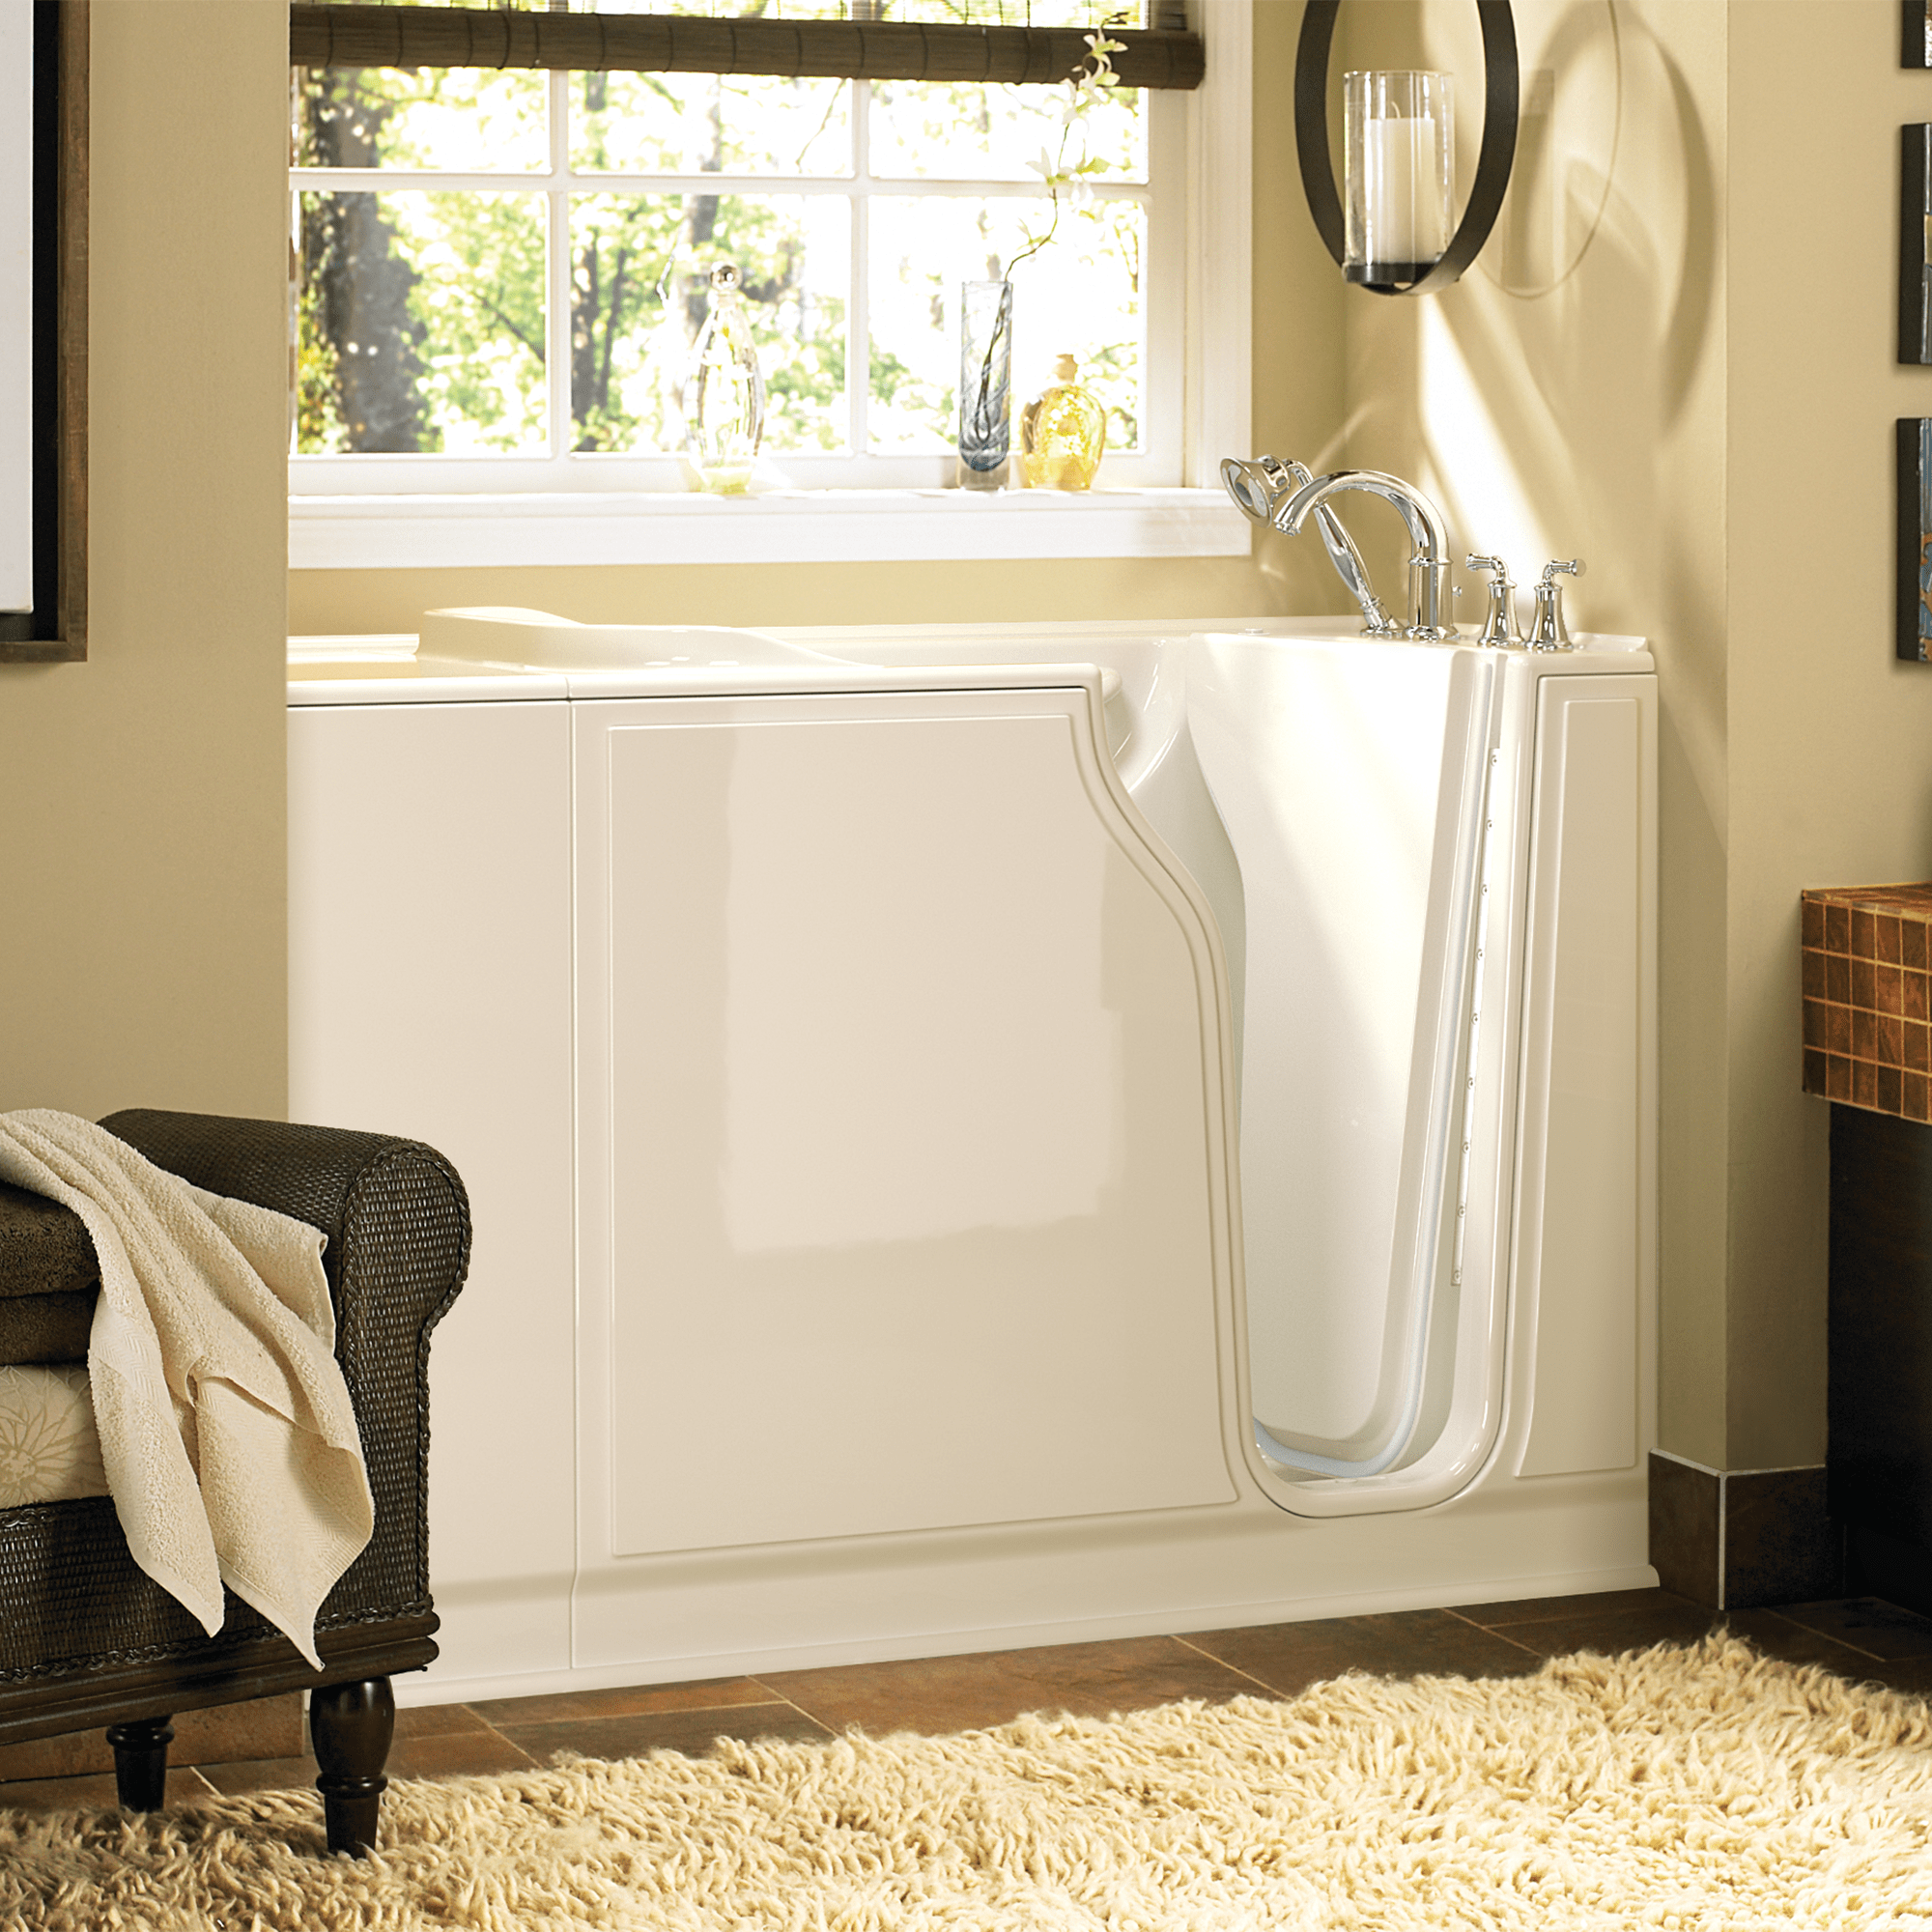 Gelcoat Value Series 30x52 Inch Walk-In Bathtub with Whirlpool Massage System - Right Hand Door and Drain